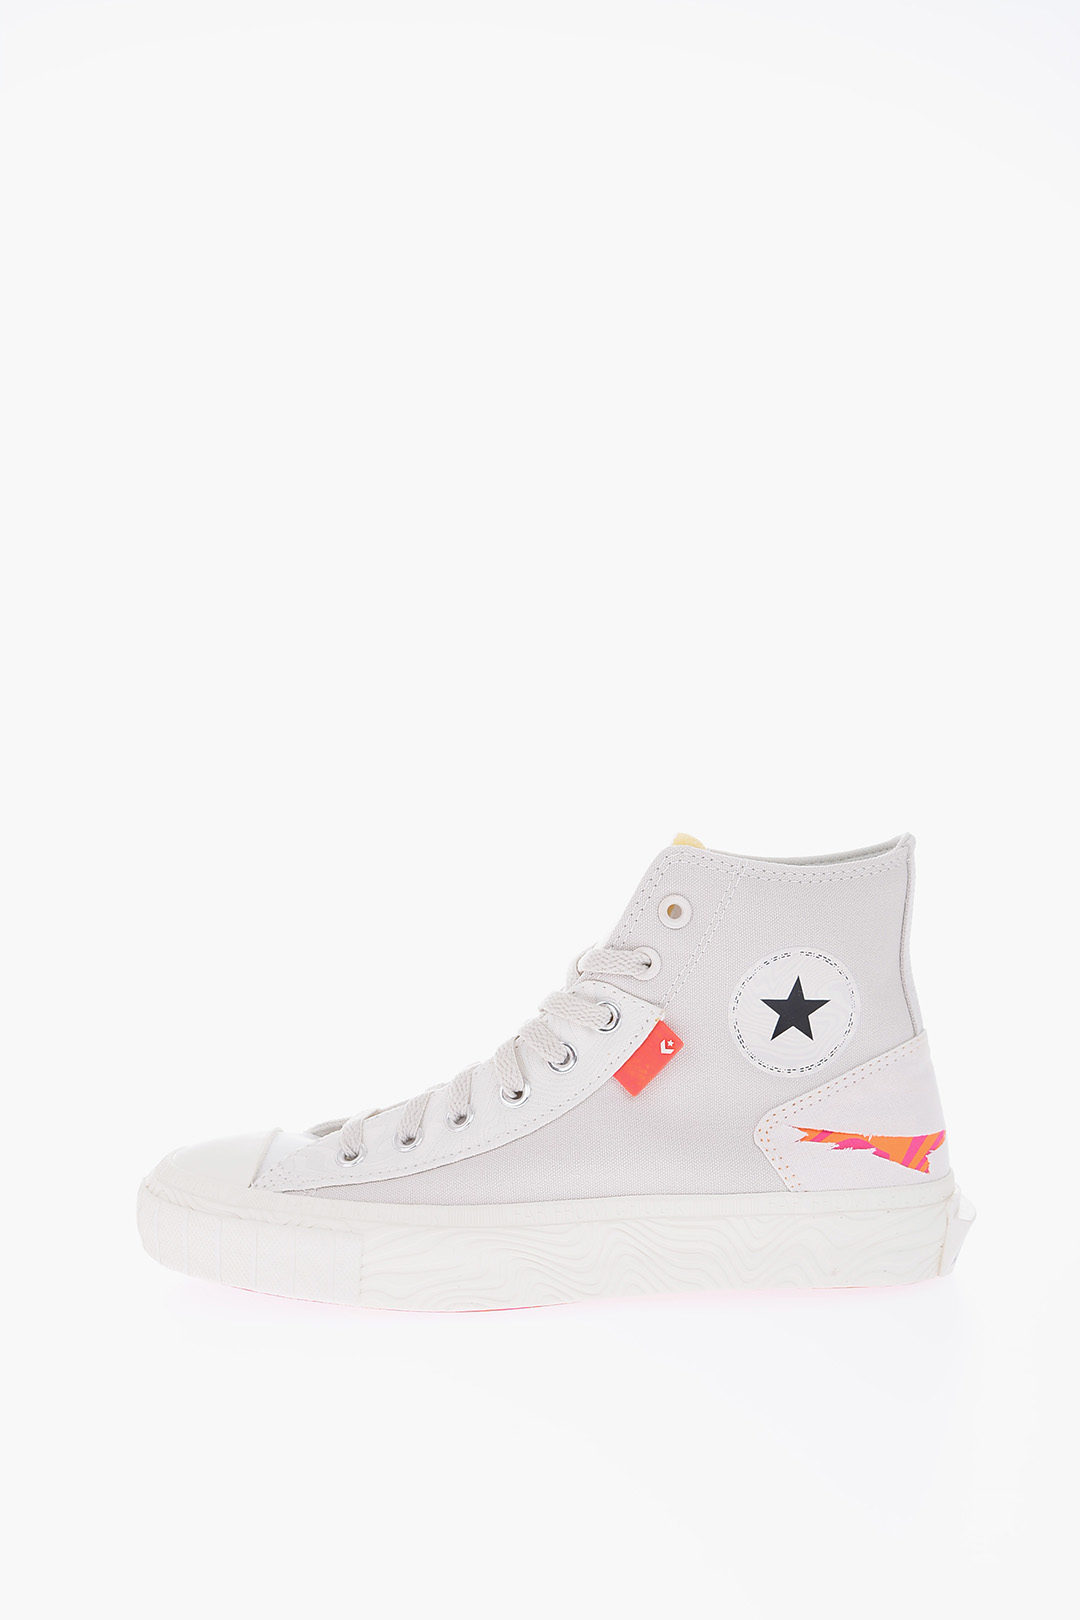 Converse ALL STAR CHUCK TAYLOR Padded High-Top Sneakers men - Glamood Outlet